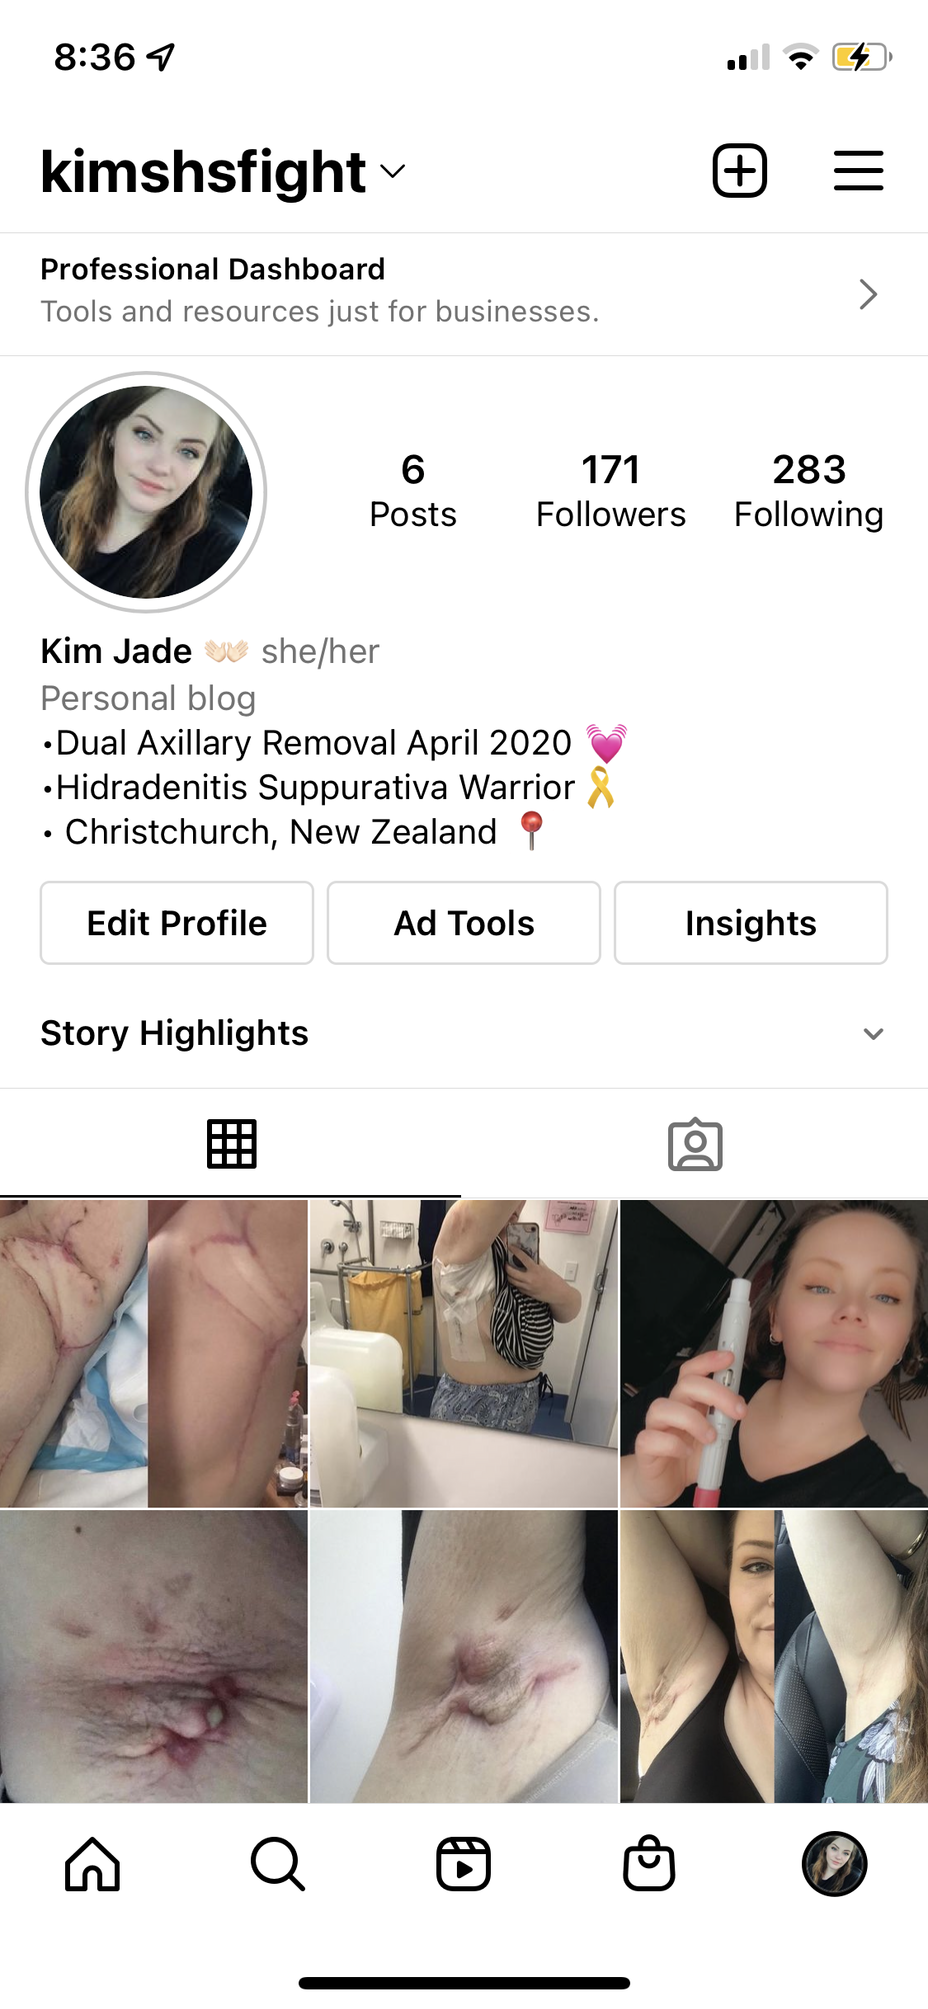 <p>Anyone have a Instagram documenting their illness? I’m looking for people to follow on mine. <a class="tm-topic-link mighty-topic" title="Hidradenitis Suppurativa" href="/topic/hidradenitis-suppurativa/" data-id="5b23ce8800553f33fe994299" data-name="Hidradenitis Suppurativa" aria-label="hashtag Hidradenitis Suppurativa">#HidradenitisSuppurativa</a>  <a class="tm-topic-link mighty-topic" title="Chronic Illness" href="/topic/chronic-illness/" data-id="5b23ce6f00553f33fe98fe39" data-name="Chronic Illness" aria-label="hashtag Chronic Illness">#ChronicIllness</a> </p>